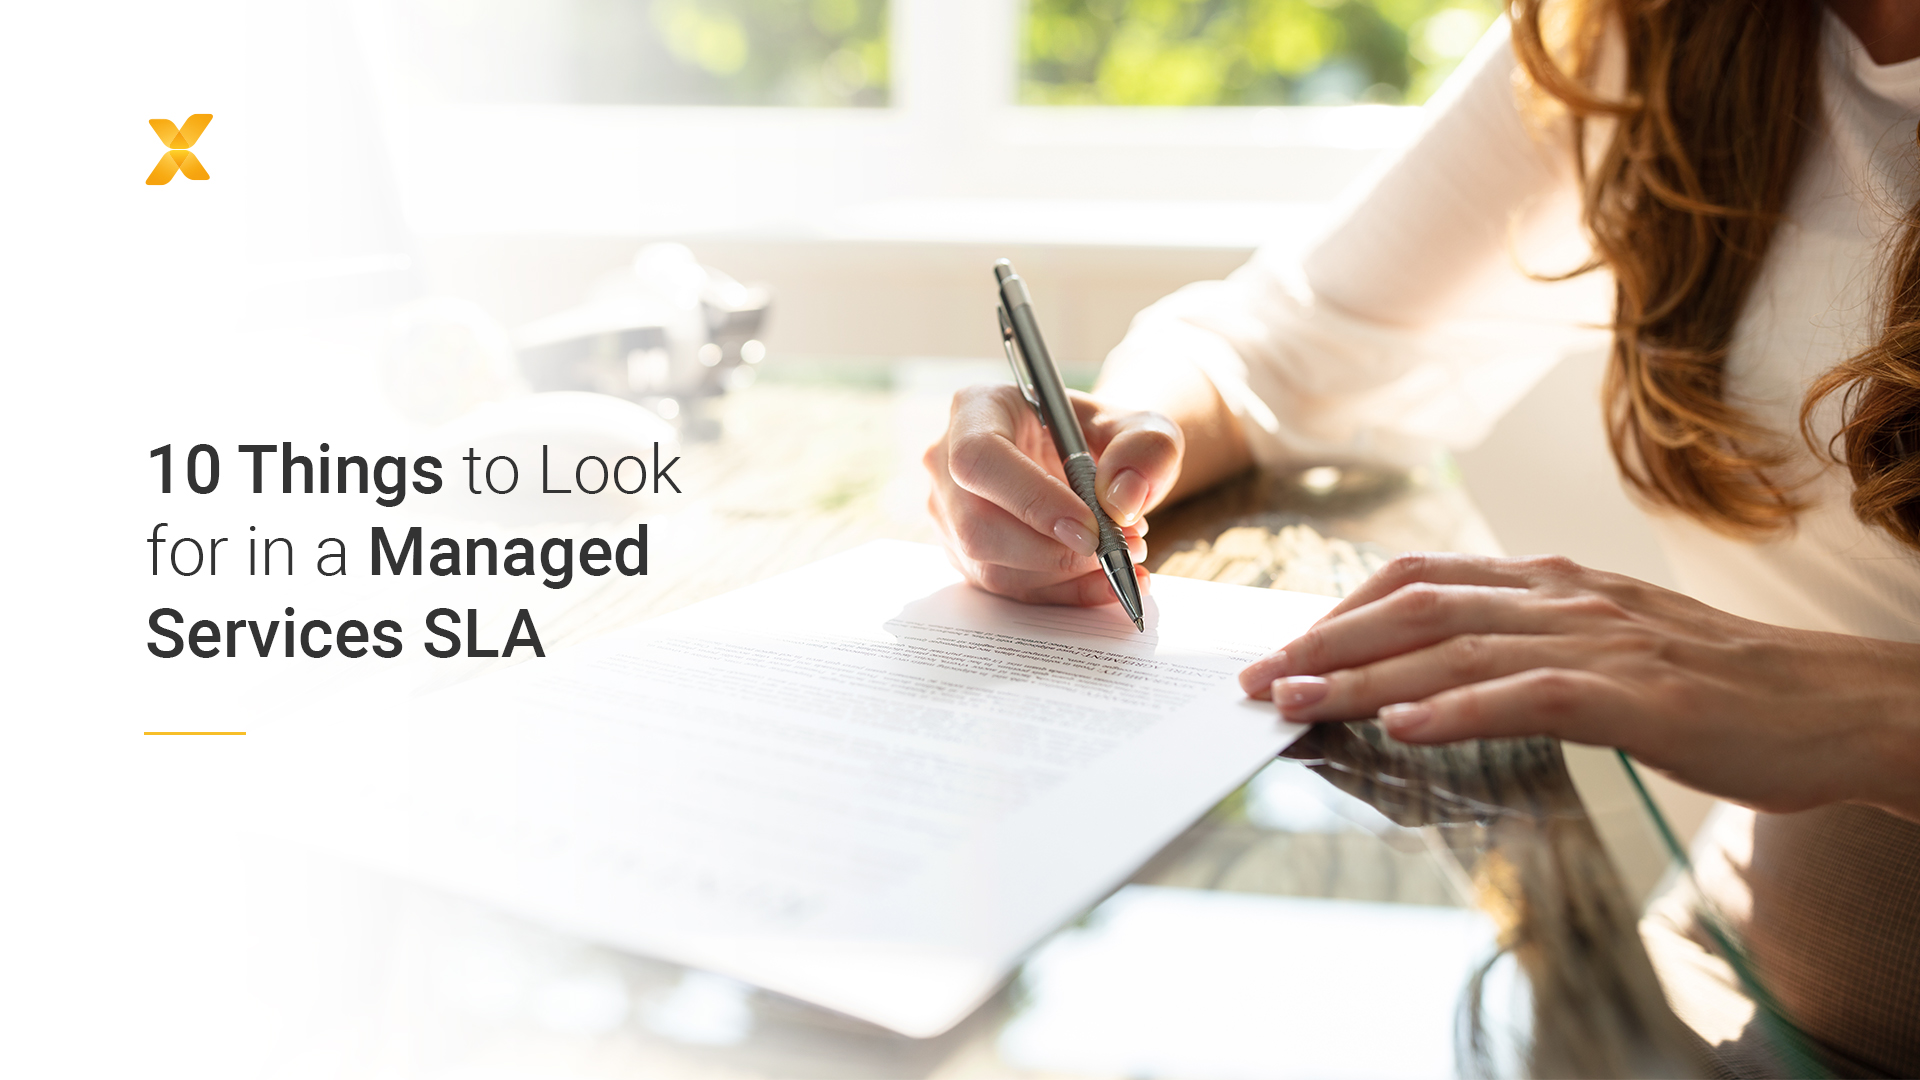 10 Things to Look for in a Managed Services SLA